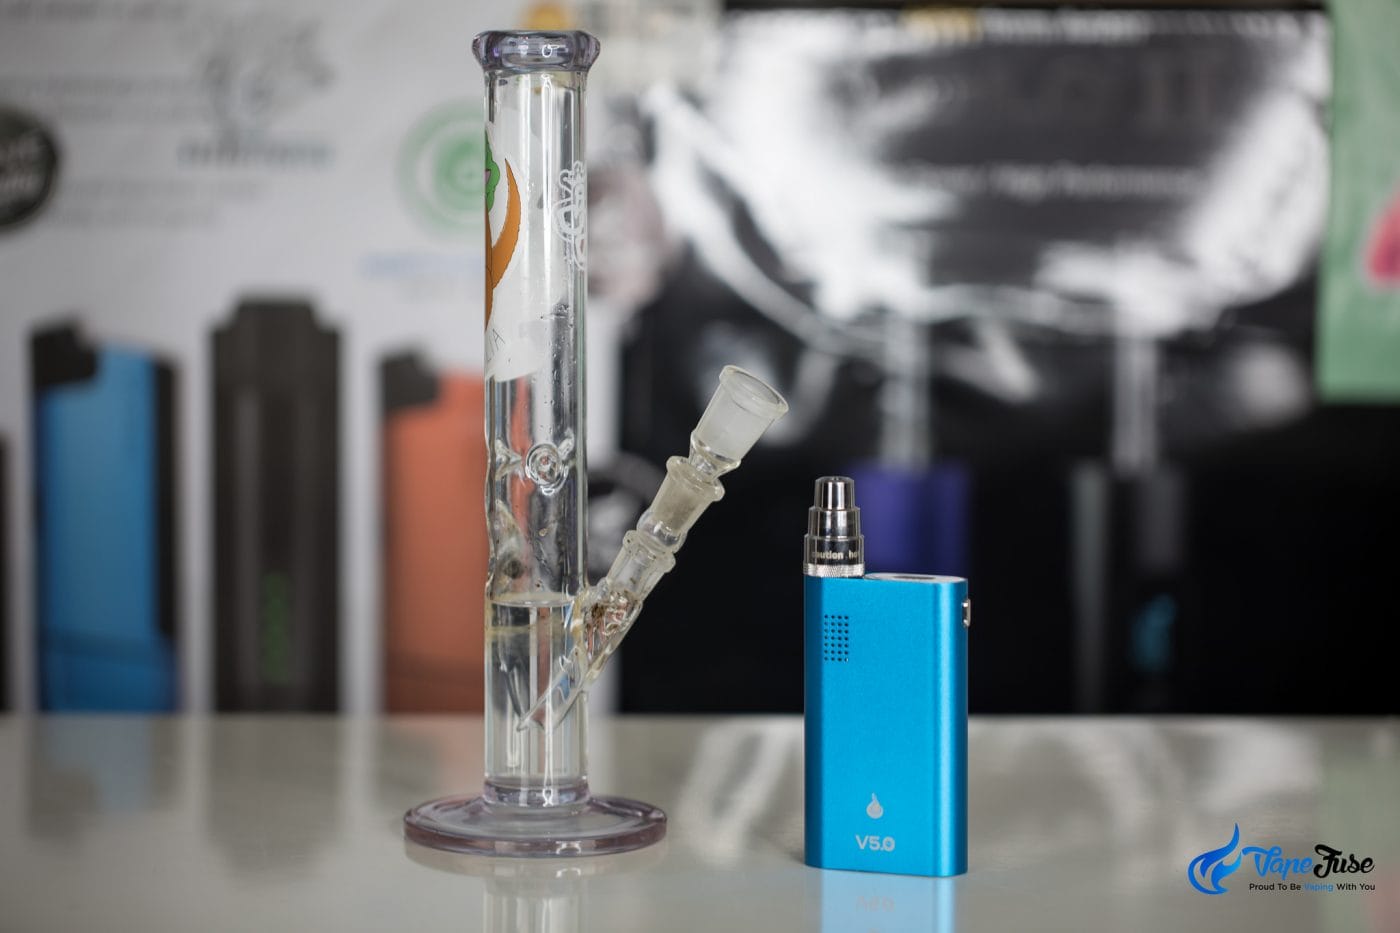 Flowermate vaporizer with waterpipe attachment